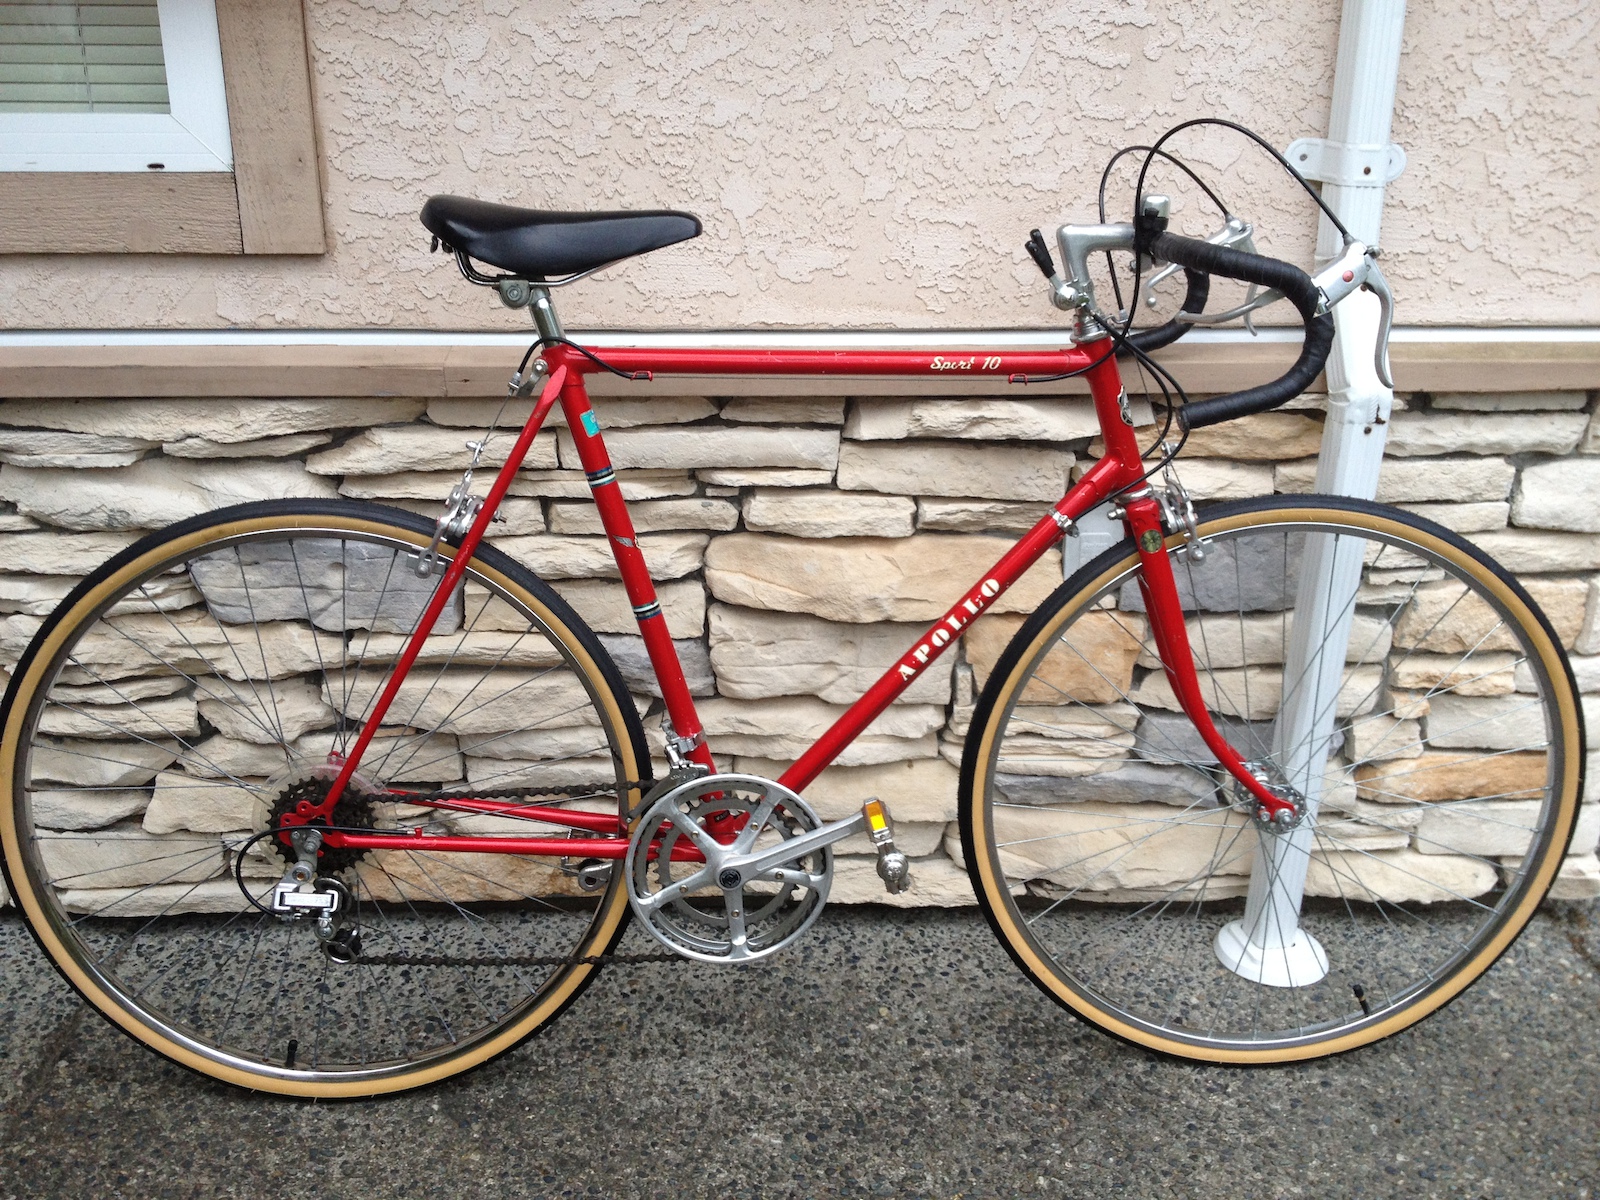 0 Mint Apollo road bike- Brand new tires and tuned up!